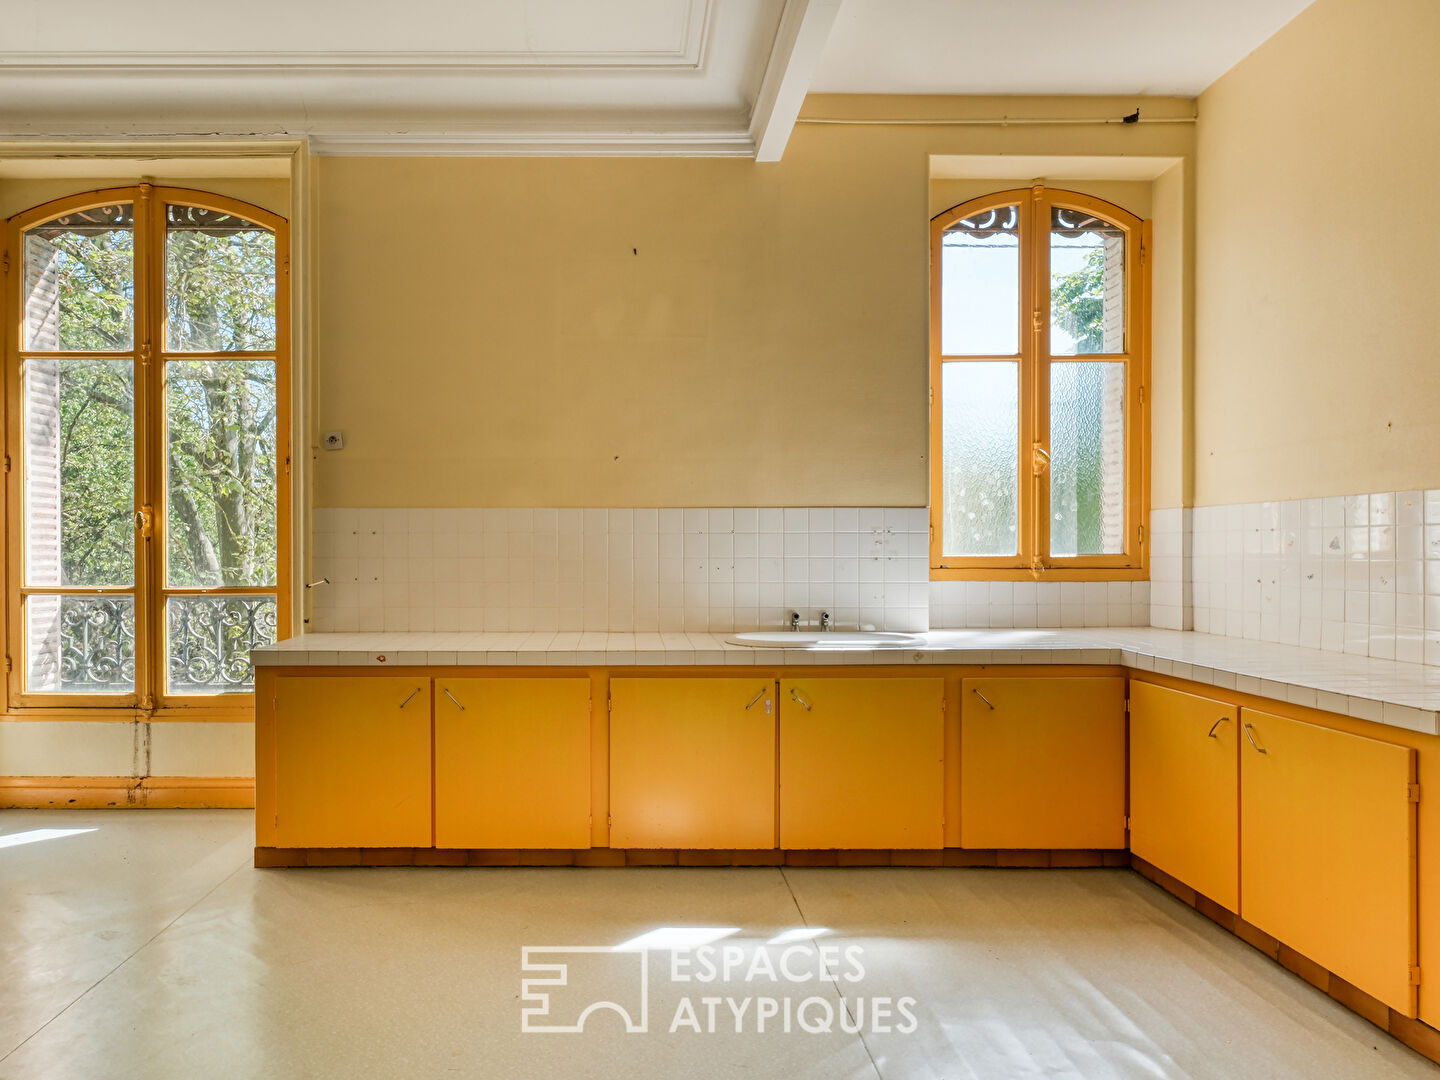 Property from the beginning of the 20th century in the heart of Montargis to rehabilitate